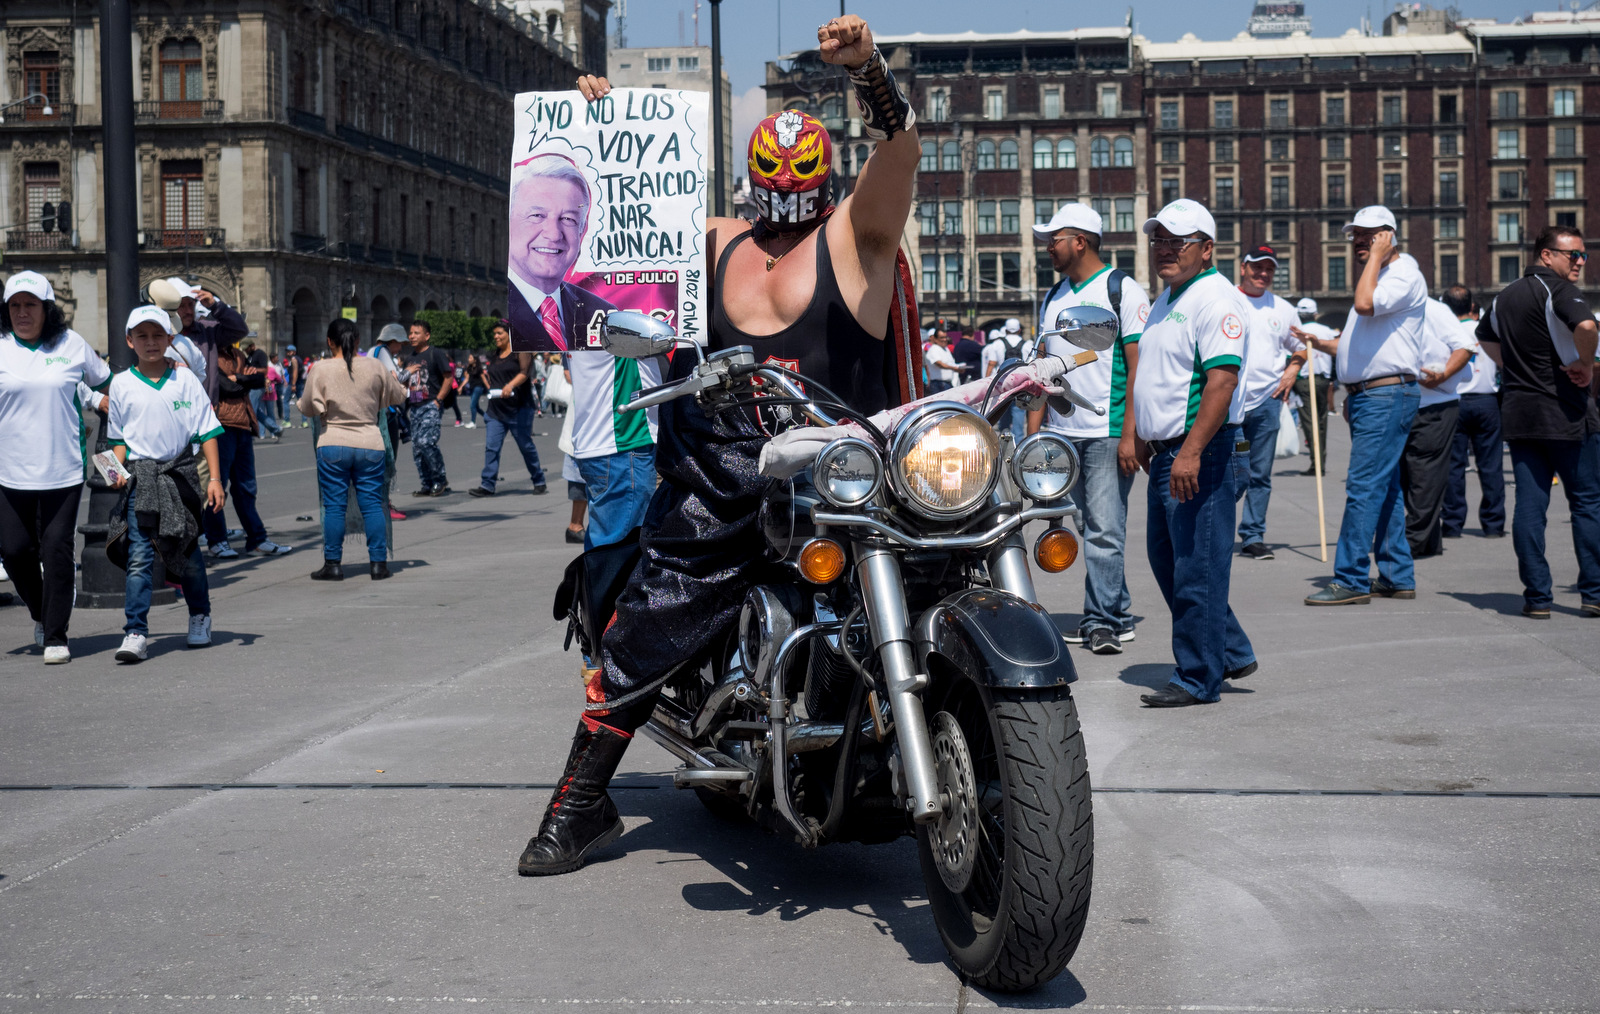 A supporter of the Mexican Union of Electrical Workers in his disguise as a luchador wrestler holds a sign showing support for leftist presidential candidate Andres Manuel Lopez Obrador in the Zocalo of Mexico City, May 1, 2018. (Photo: José Luis Granados Ceja)